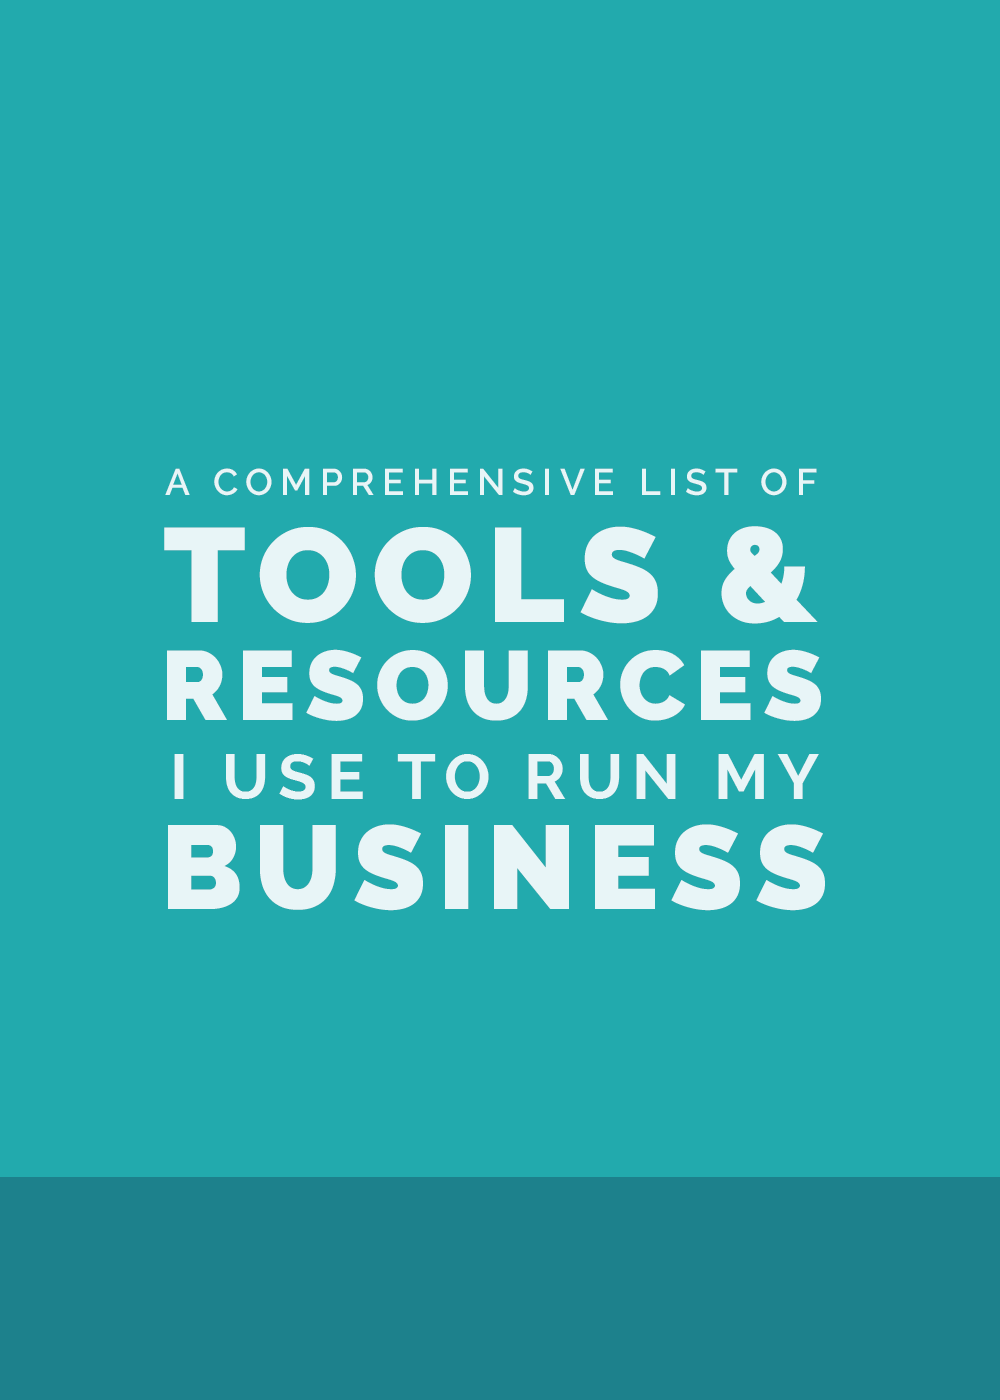 Free Tools & Resources